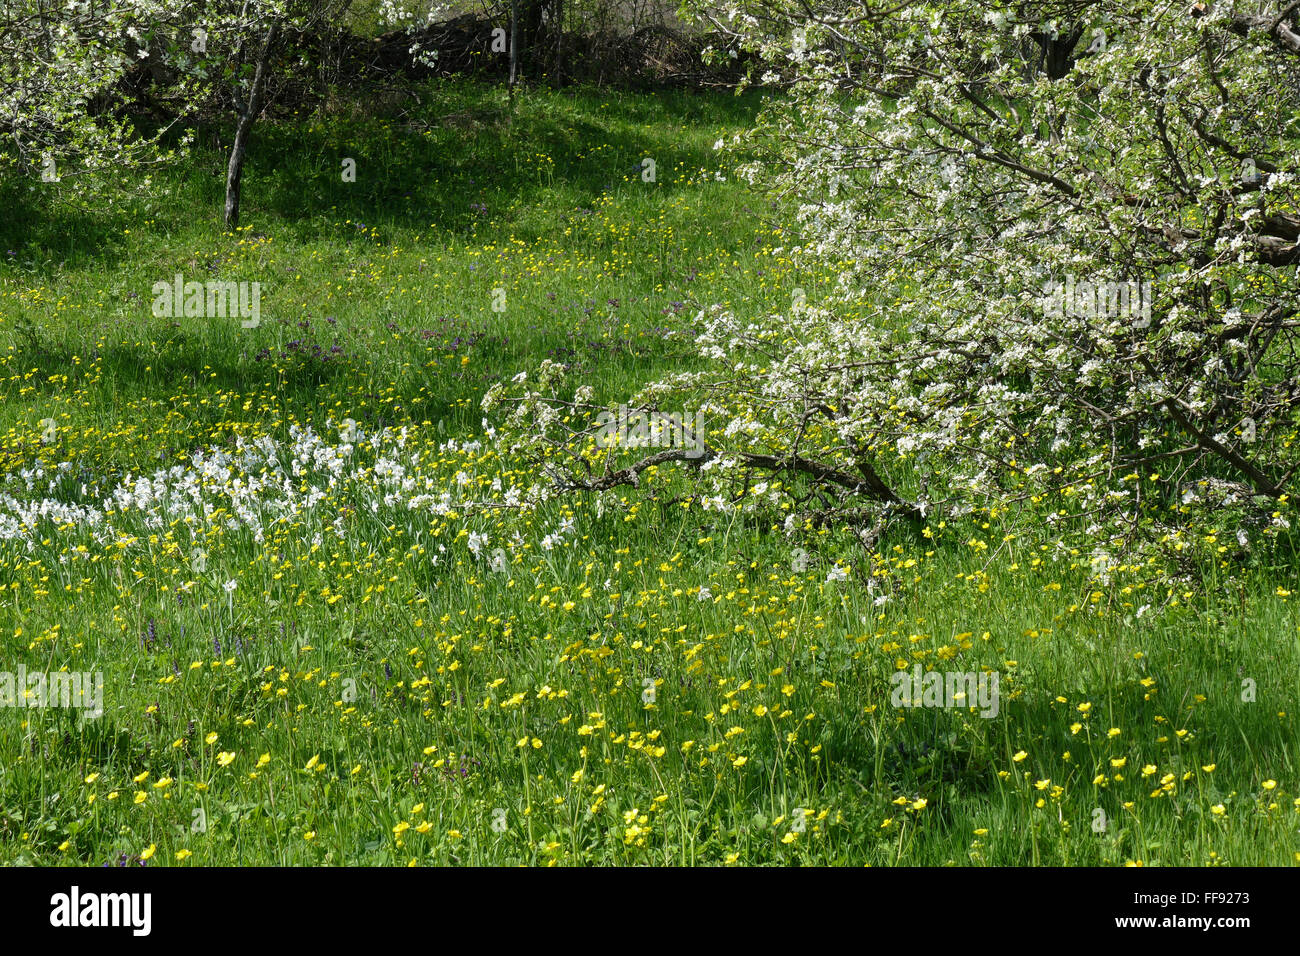 Spring garden with blooming flowers and apple trees. Stock Photo